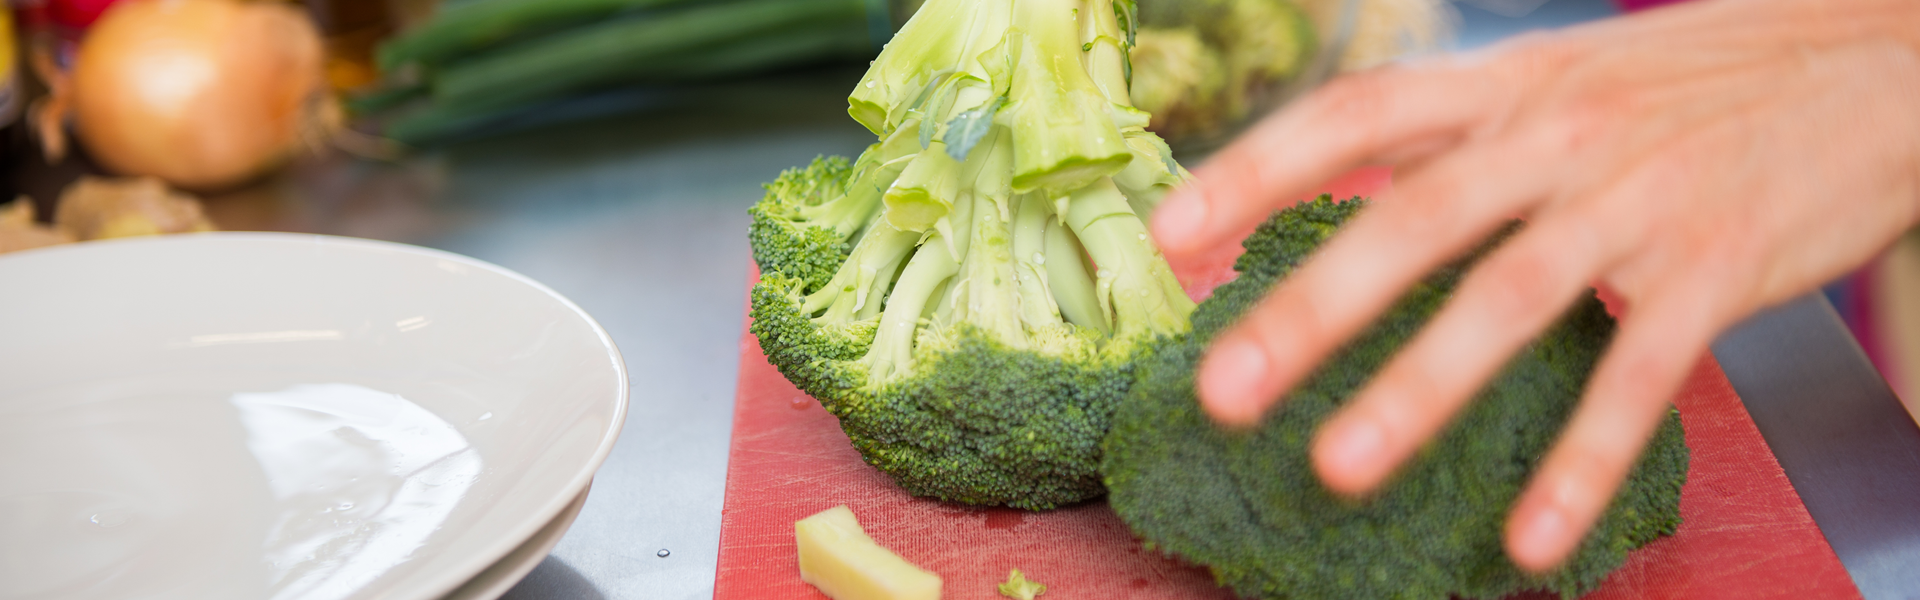 person holding broccoli on a cutting board to prepare it for cooking